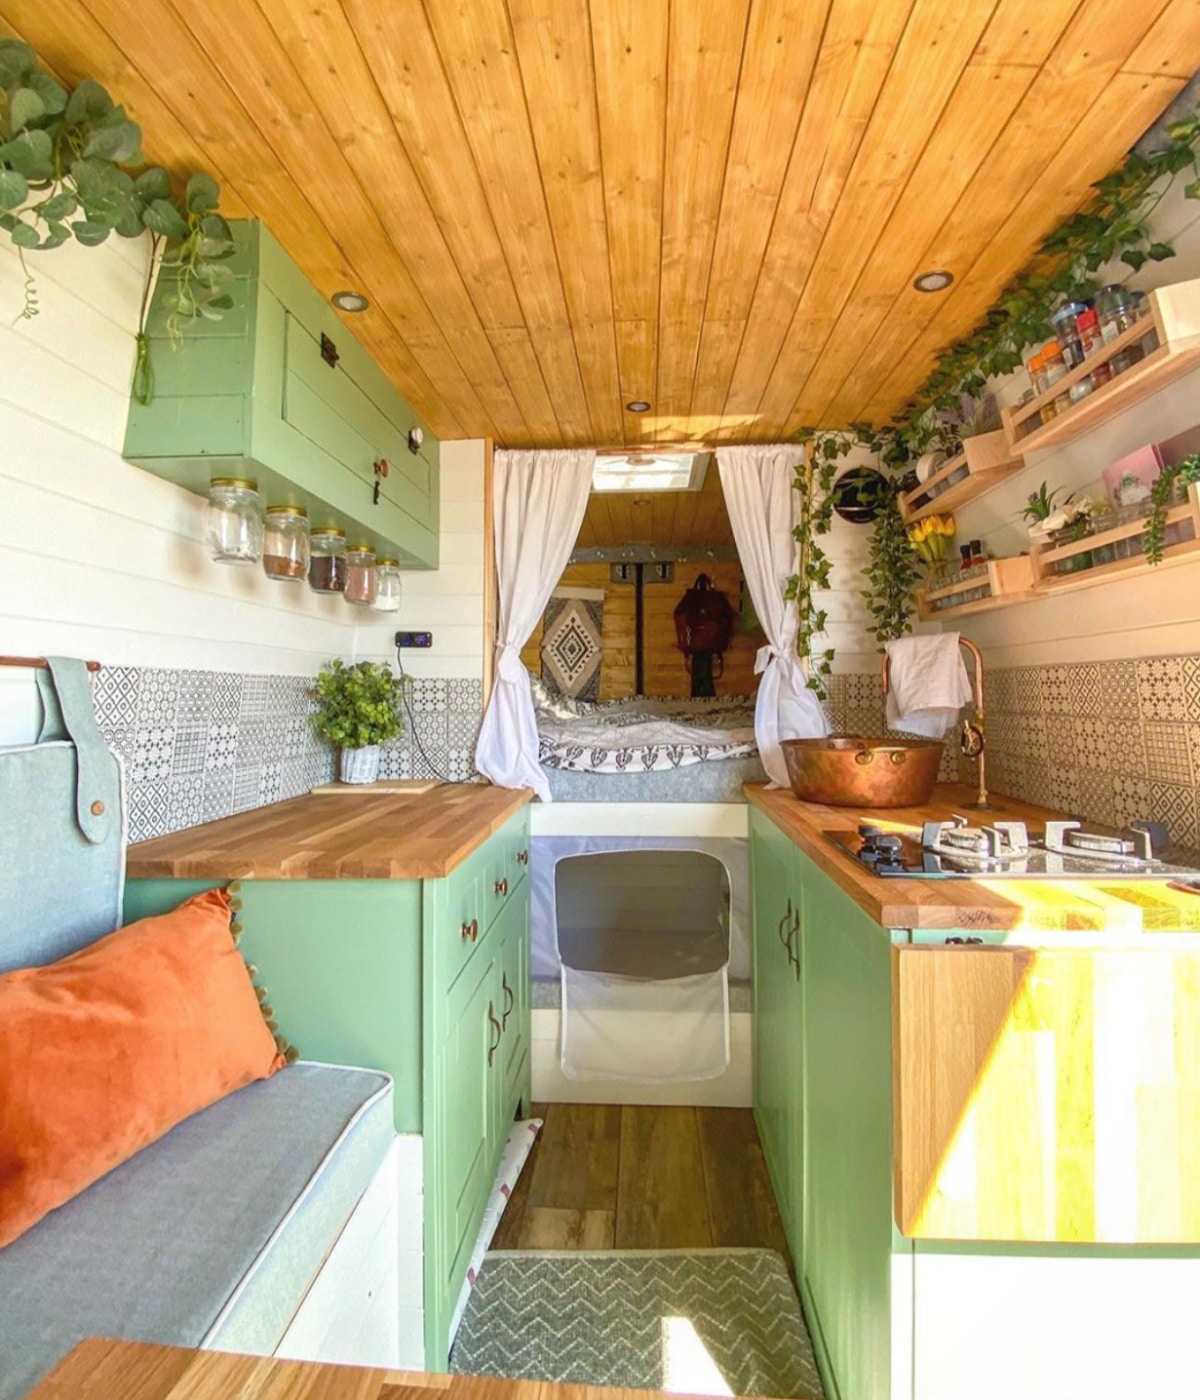 Tiny house with green furrniture